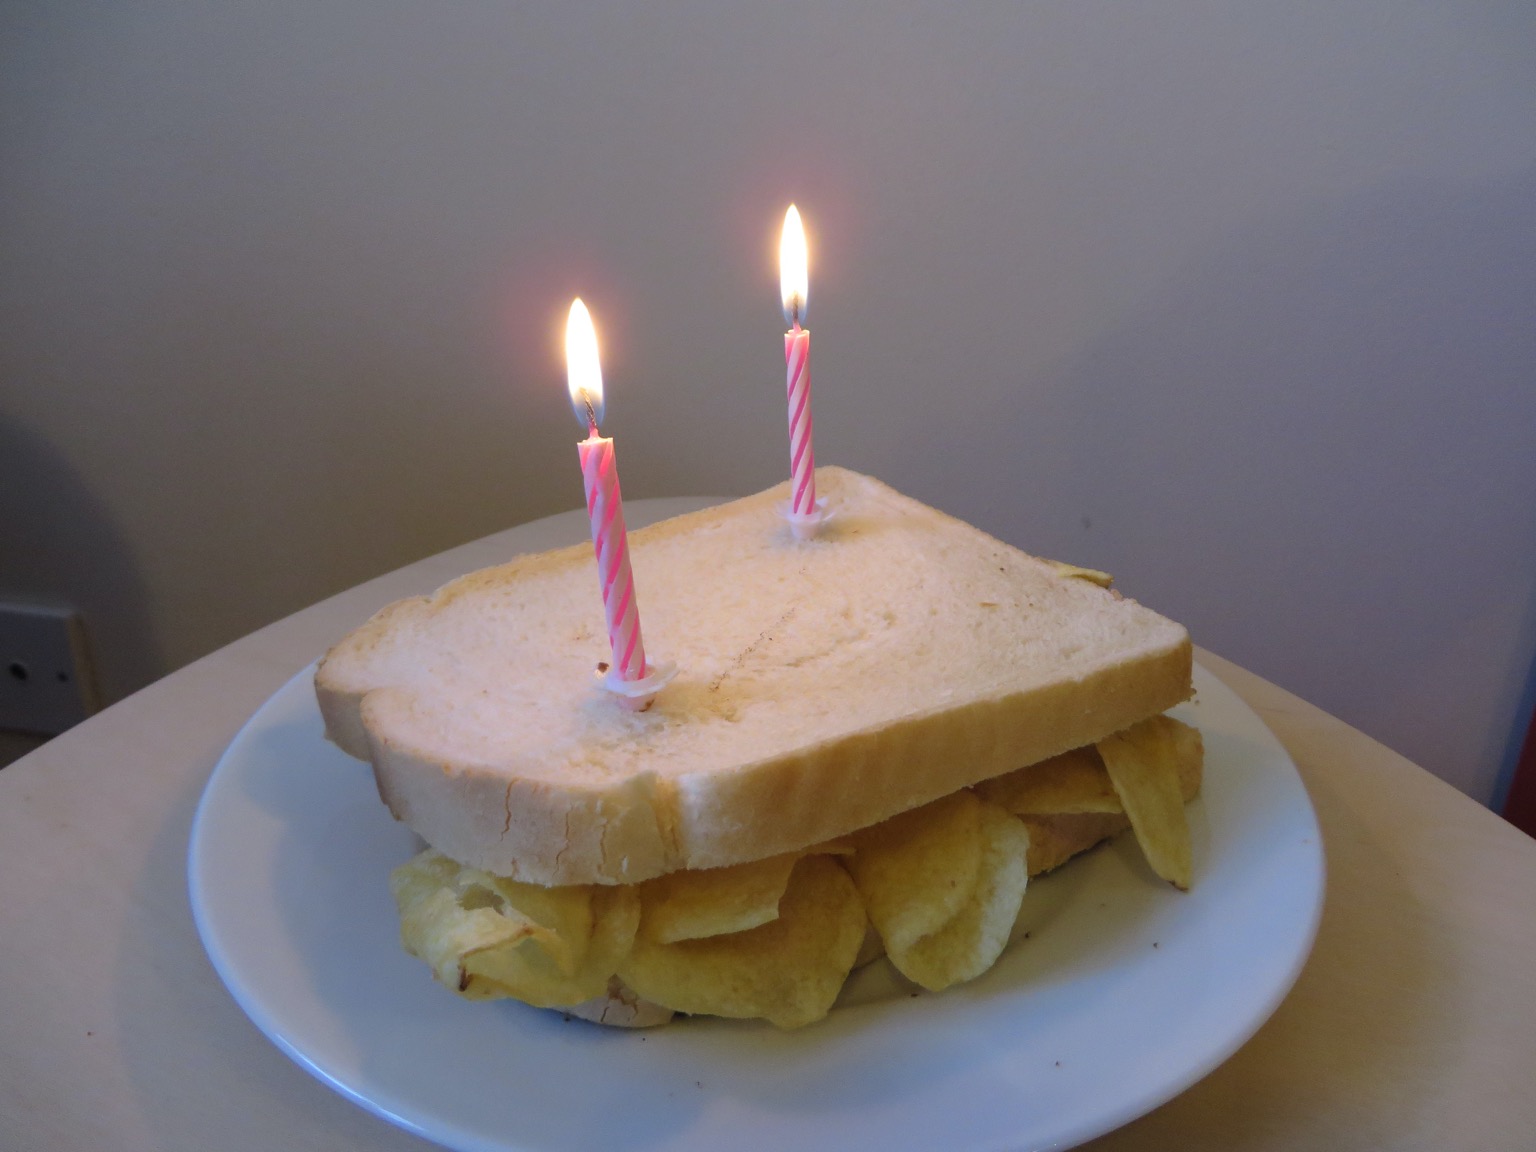 Two birthday candles on a white crisp sandwich